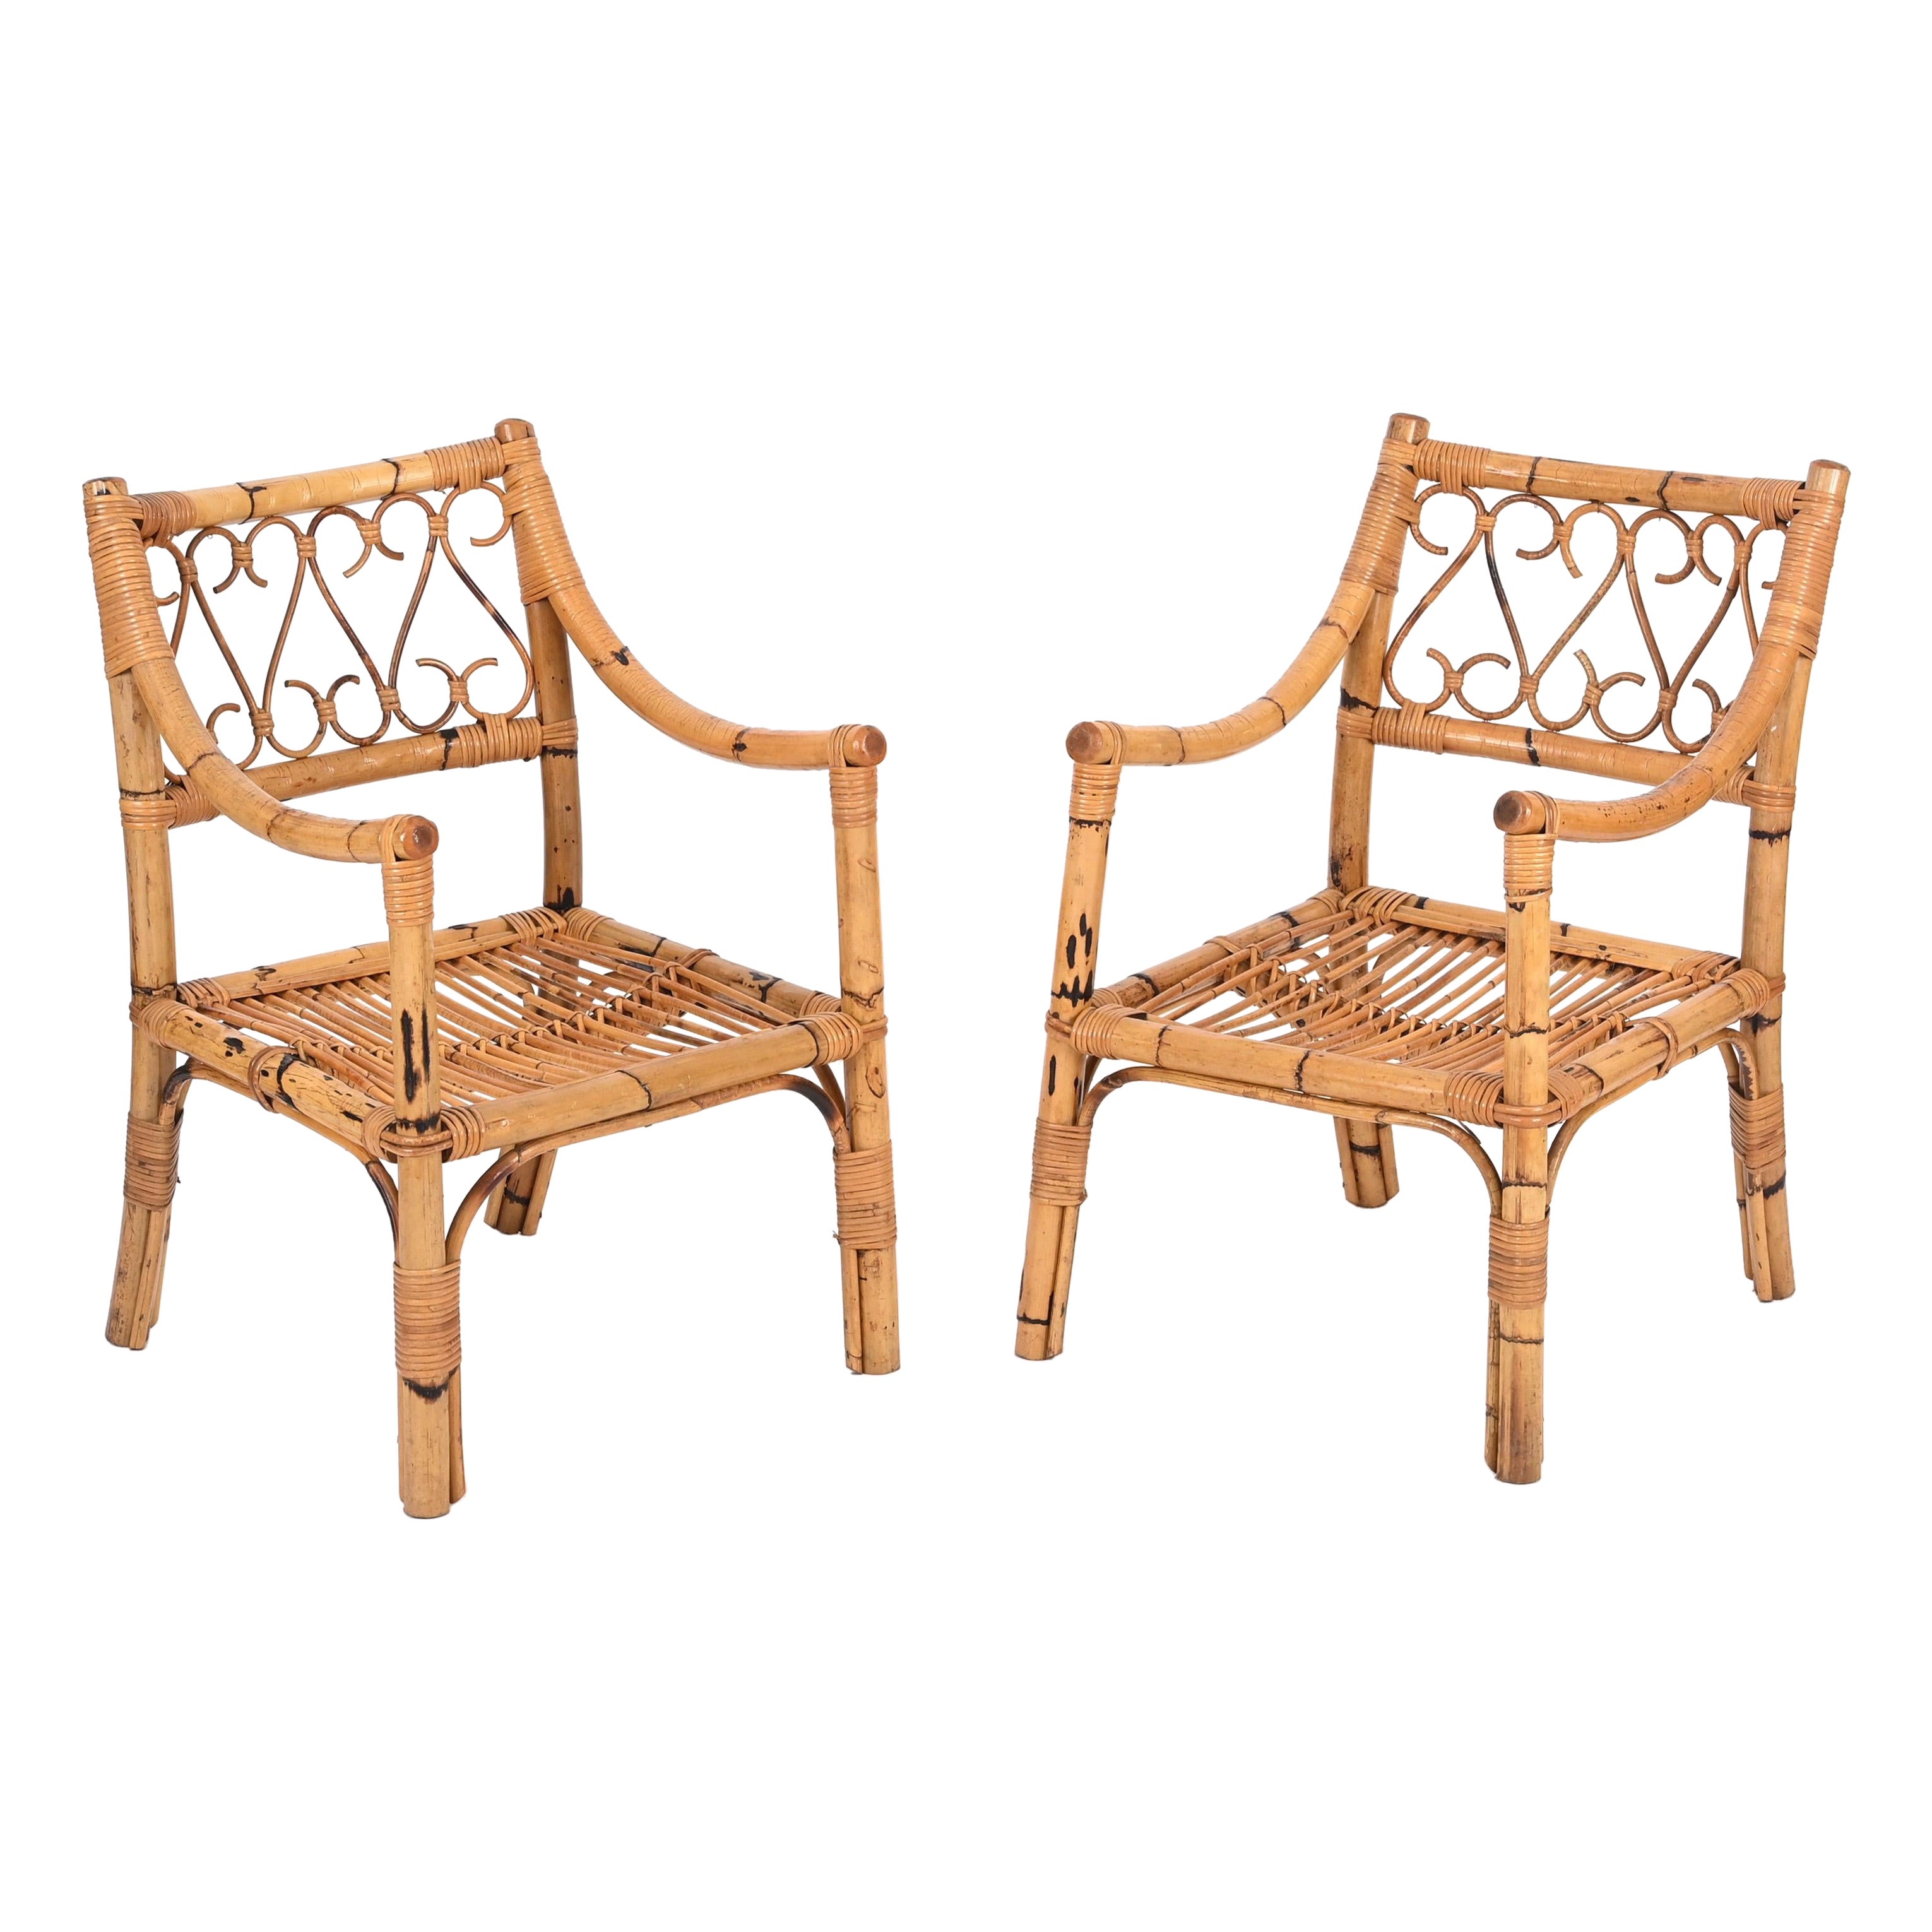 Pair of Vivai del Sud Mid-Century Armchairs in Bamboo and Rattan, Italy 1970s